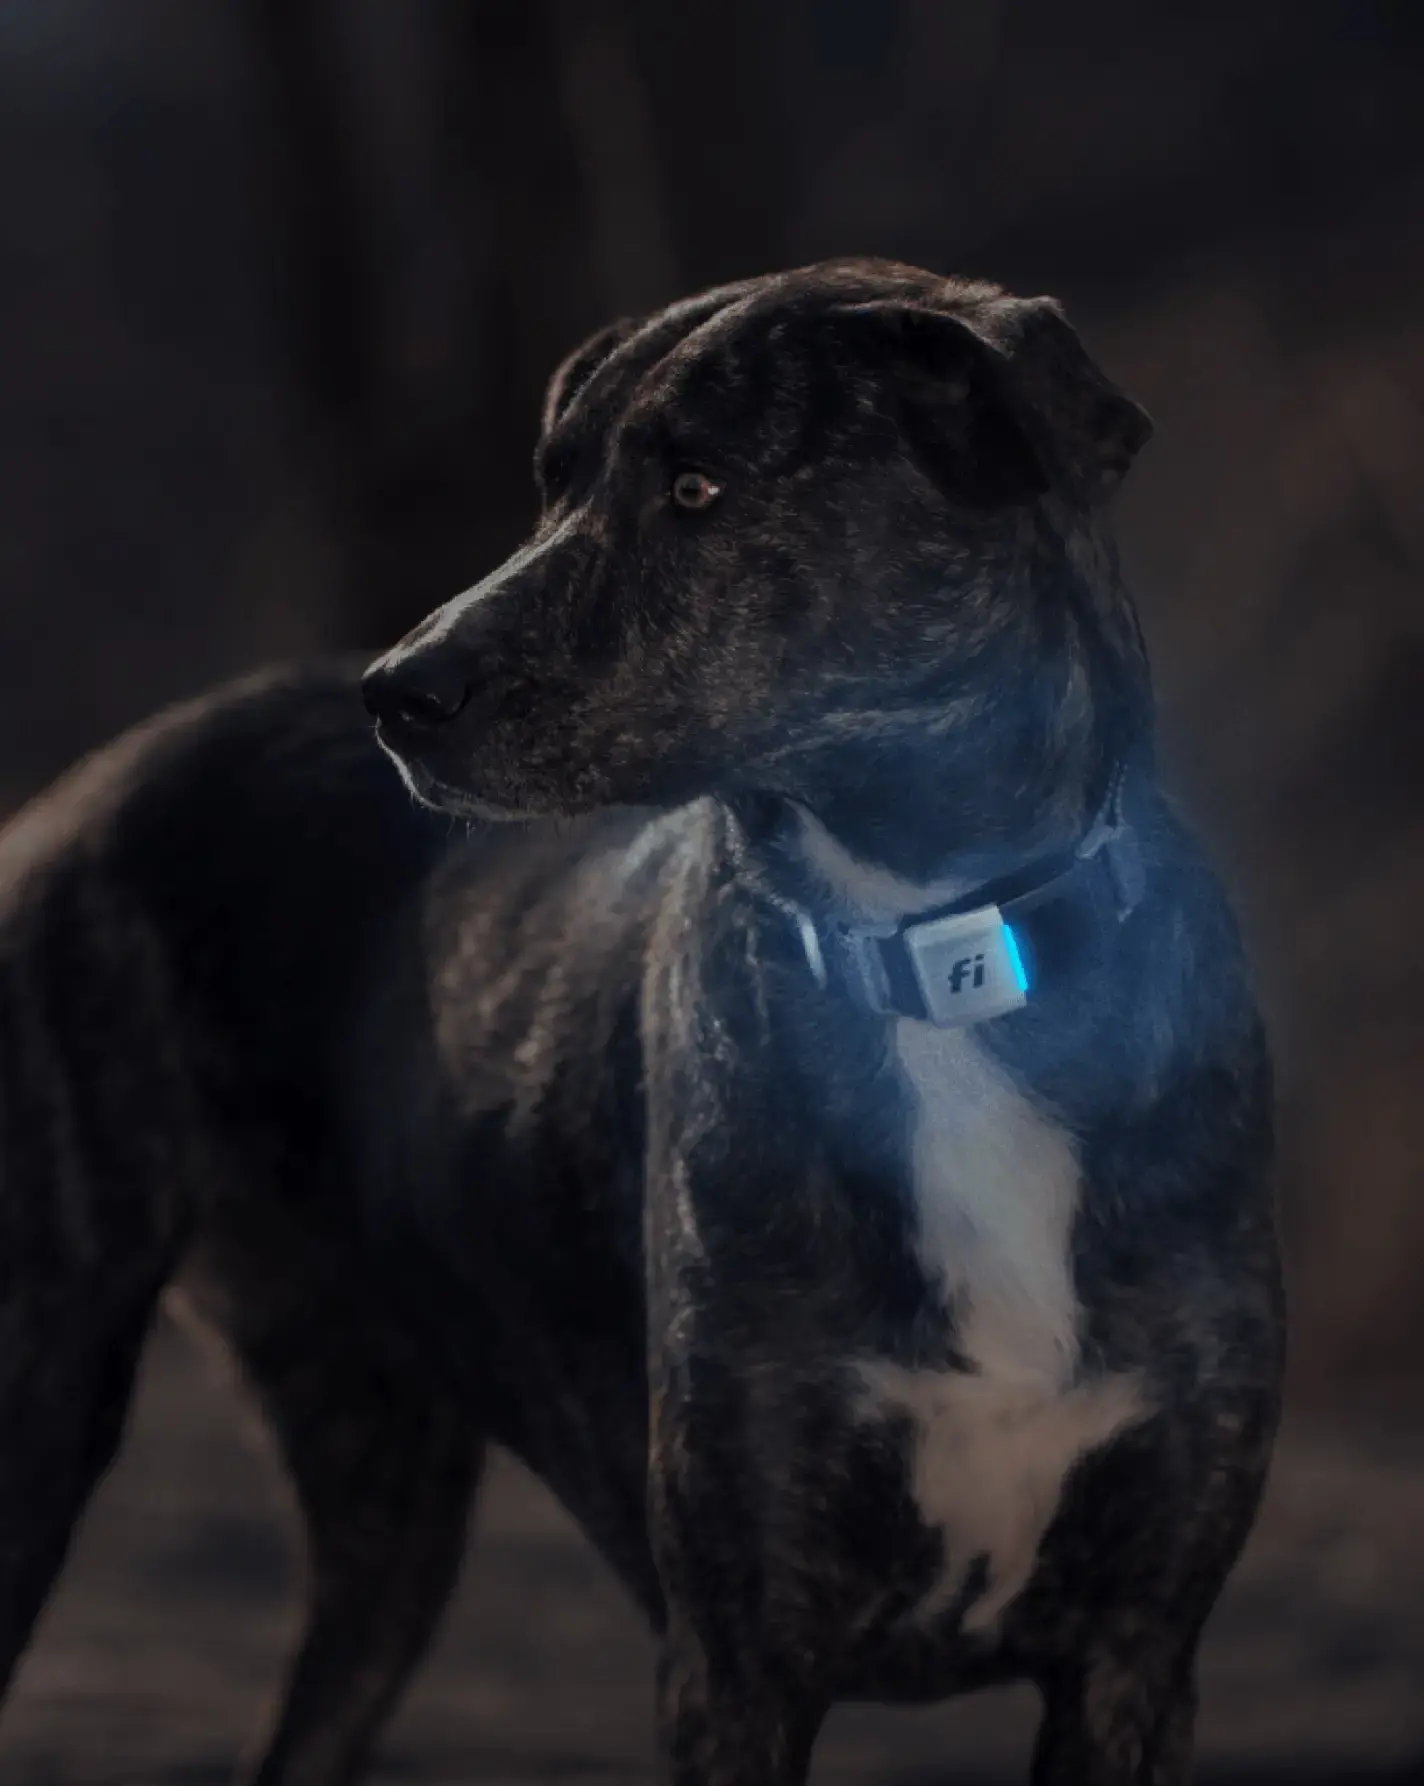 HOW WELL CAN DOGS SEE IN THE DARK